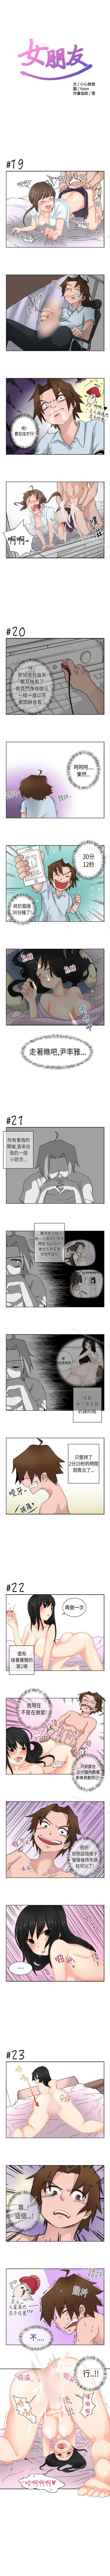 Latinos 女朋友 1-20 Xxx - Page 5